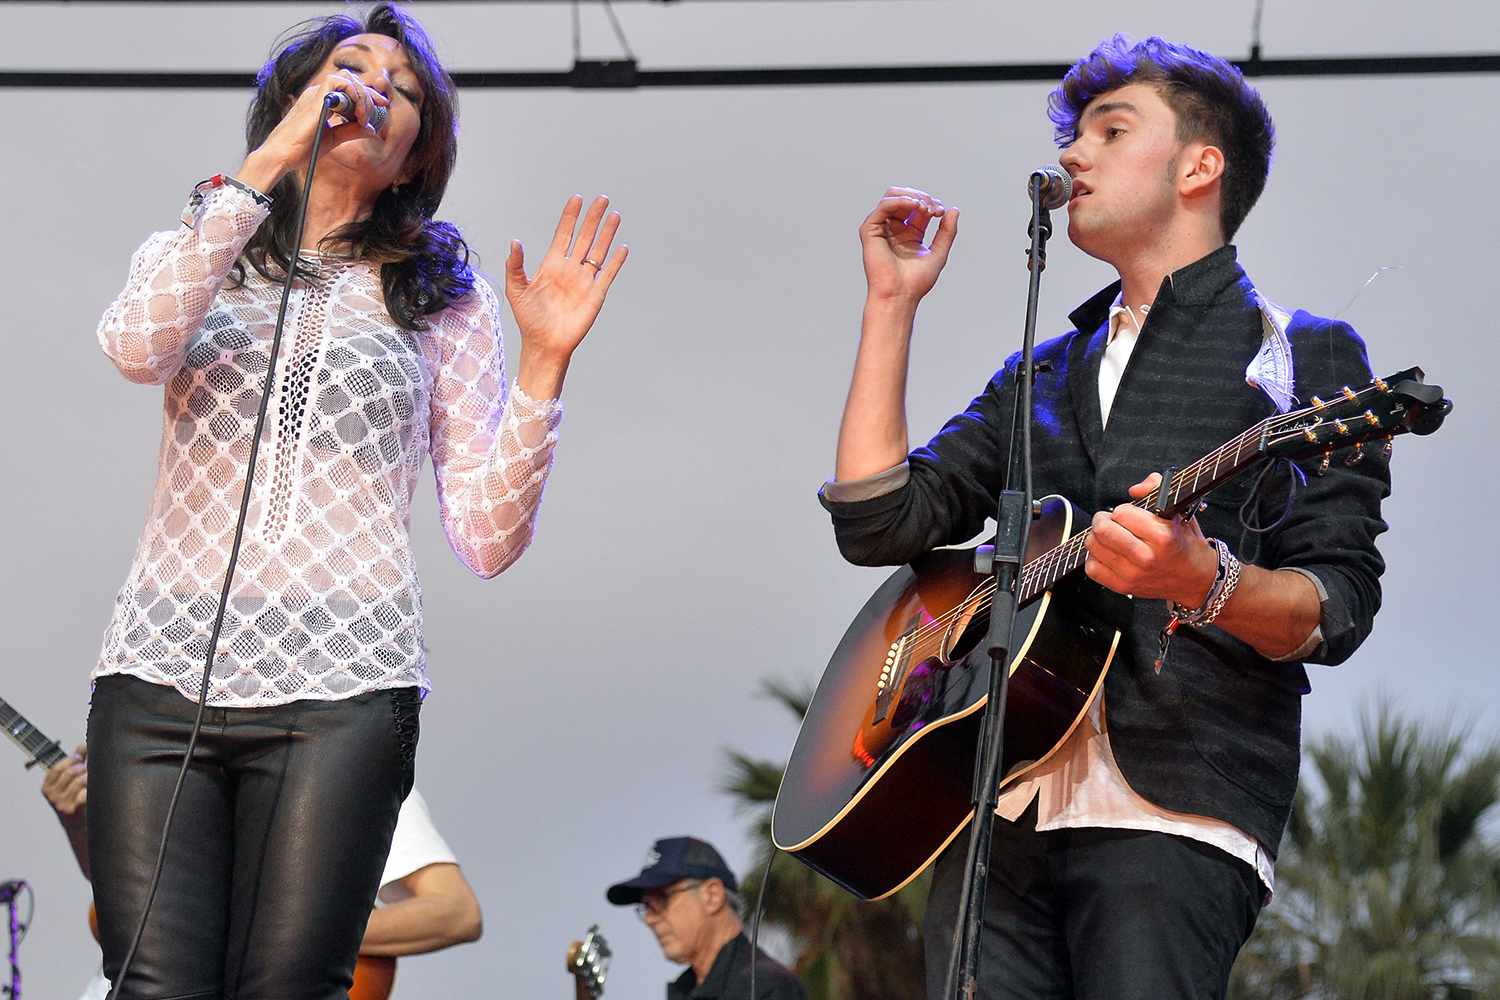 Musicians Katey Sagal (L) and Jackson White of Katey Sagal and the Forest Rangers perform onstage during day 1 of 2014 Stagecoach: California's Country Music Festival at the Empire Polo Club on April 25, 2014 in Indio, California.